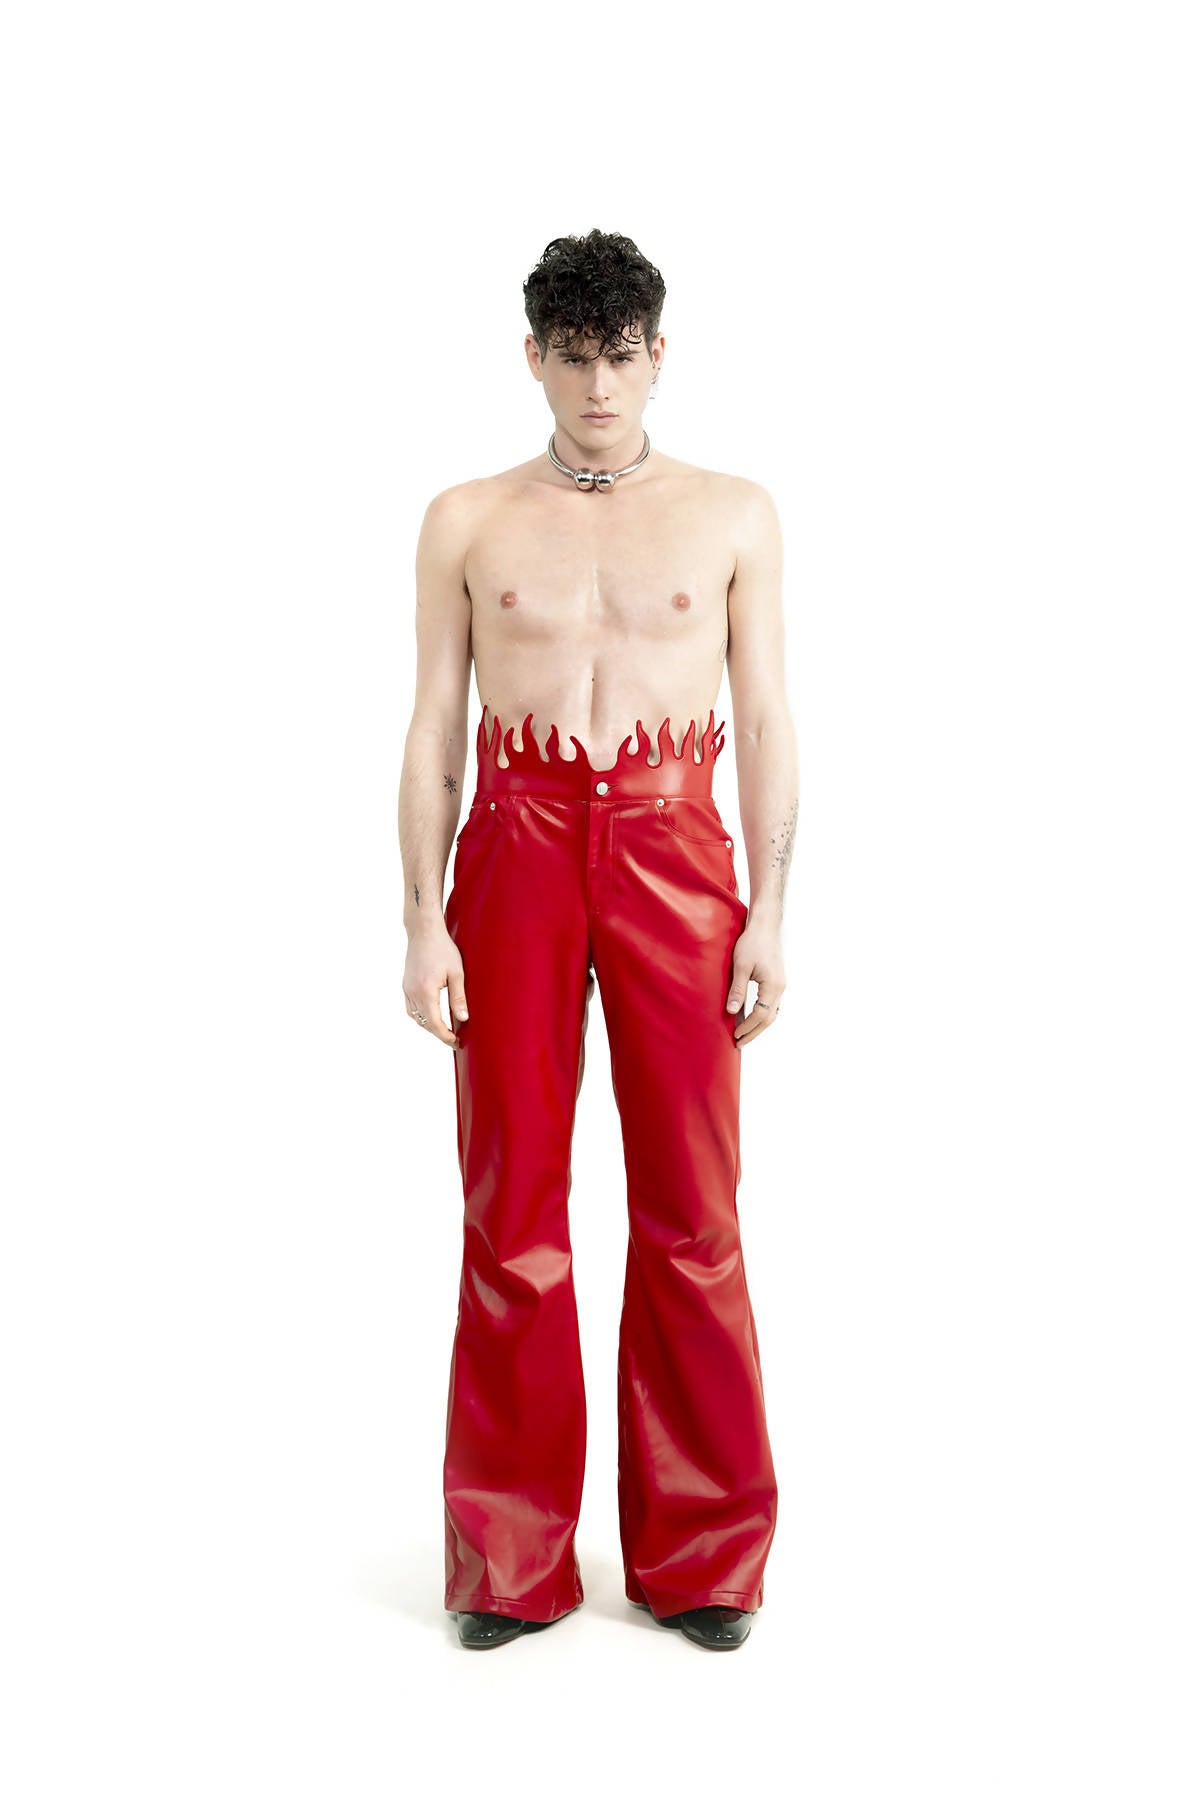 FBMT Clothing FBMT Hot Flame Faux Leather Pants (Red) 